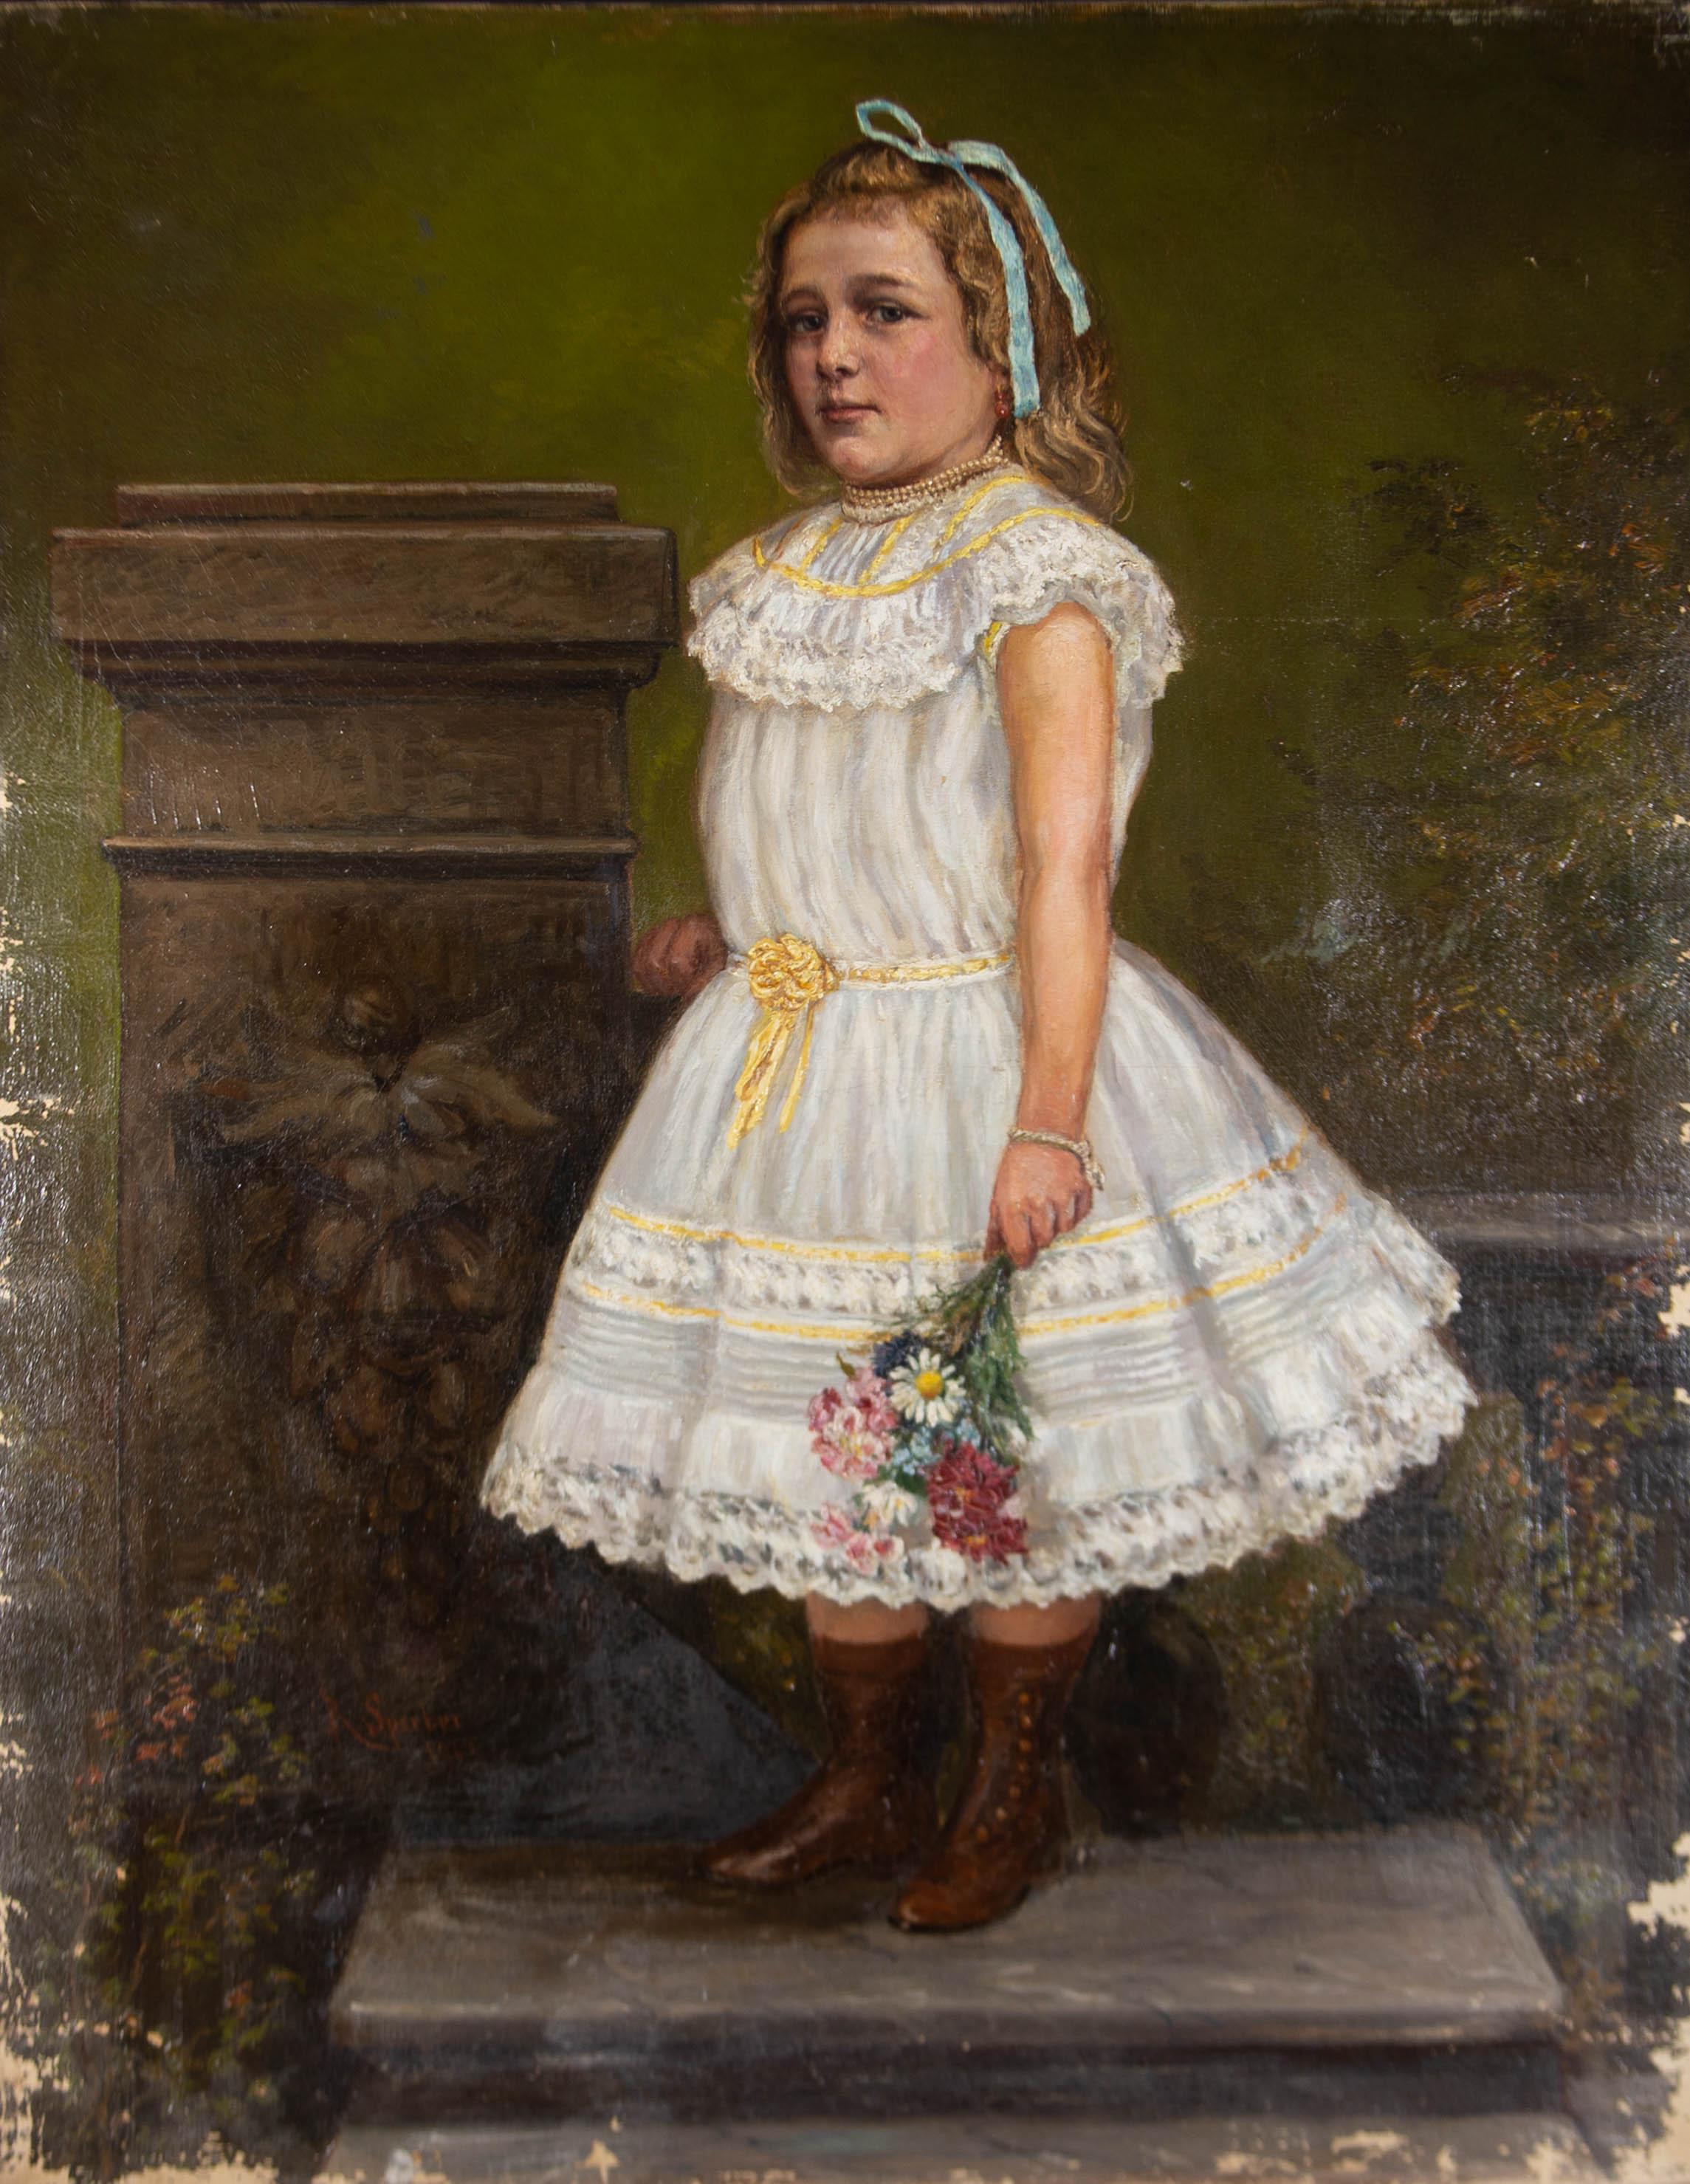 A fine oil of considerable size showing a young girl holding a bunch of flowers, wearing a white lace party dress with yellow trim and a blue ribbon in her blonde hair. The painting has been signed and dated in the lower left quadrant. The painting